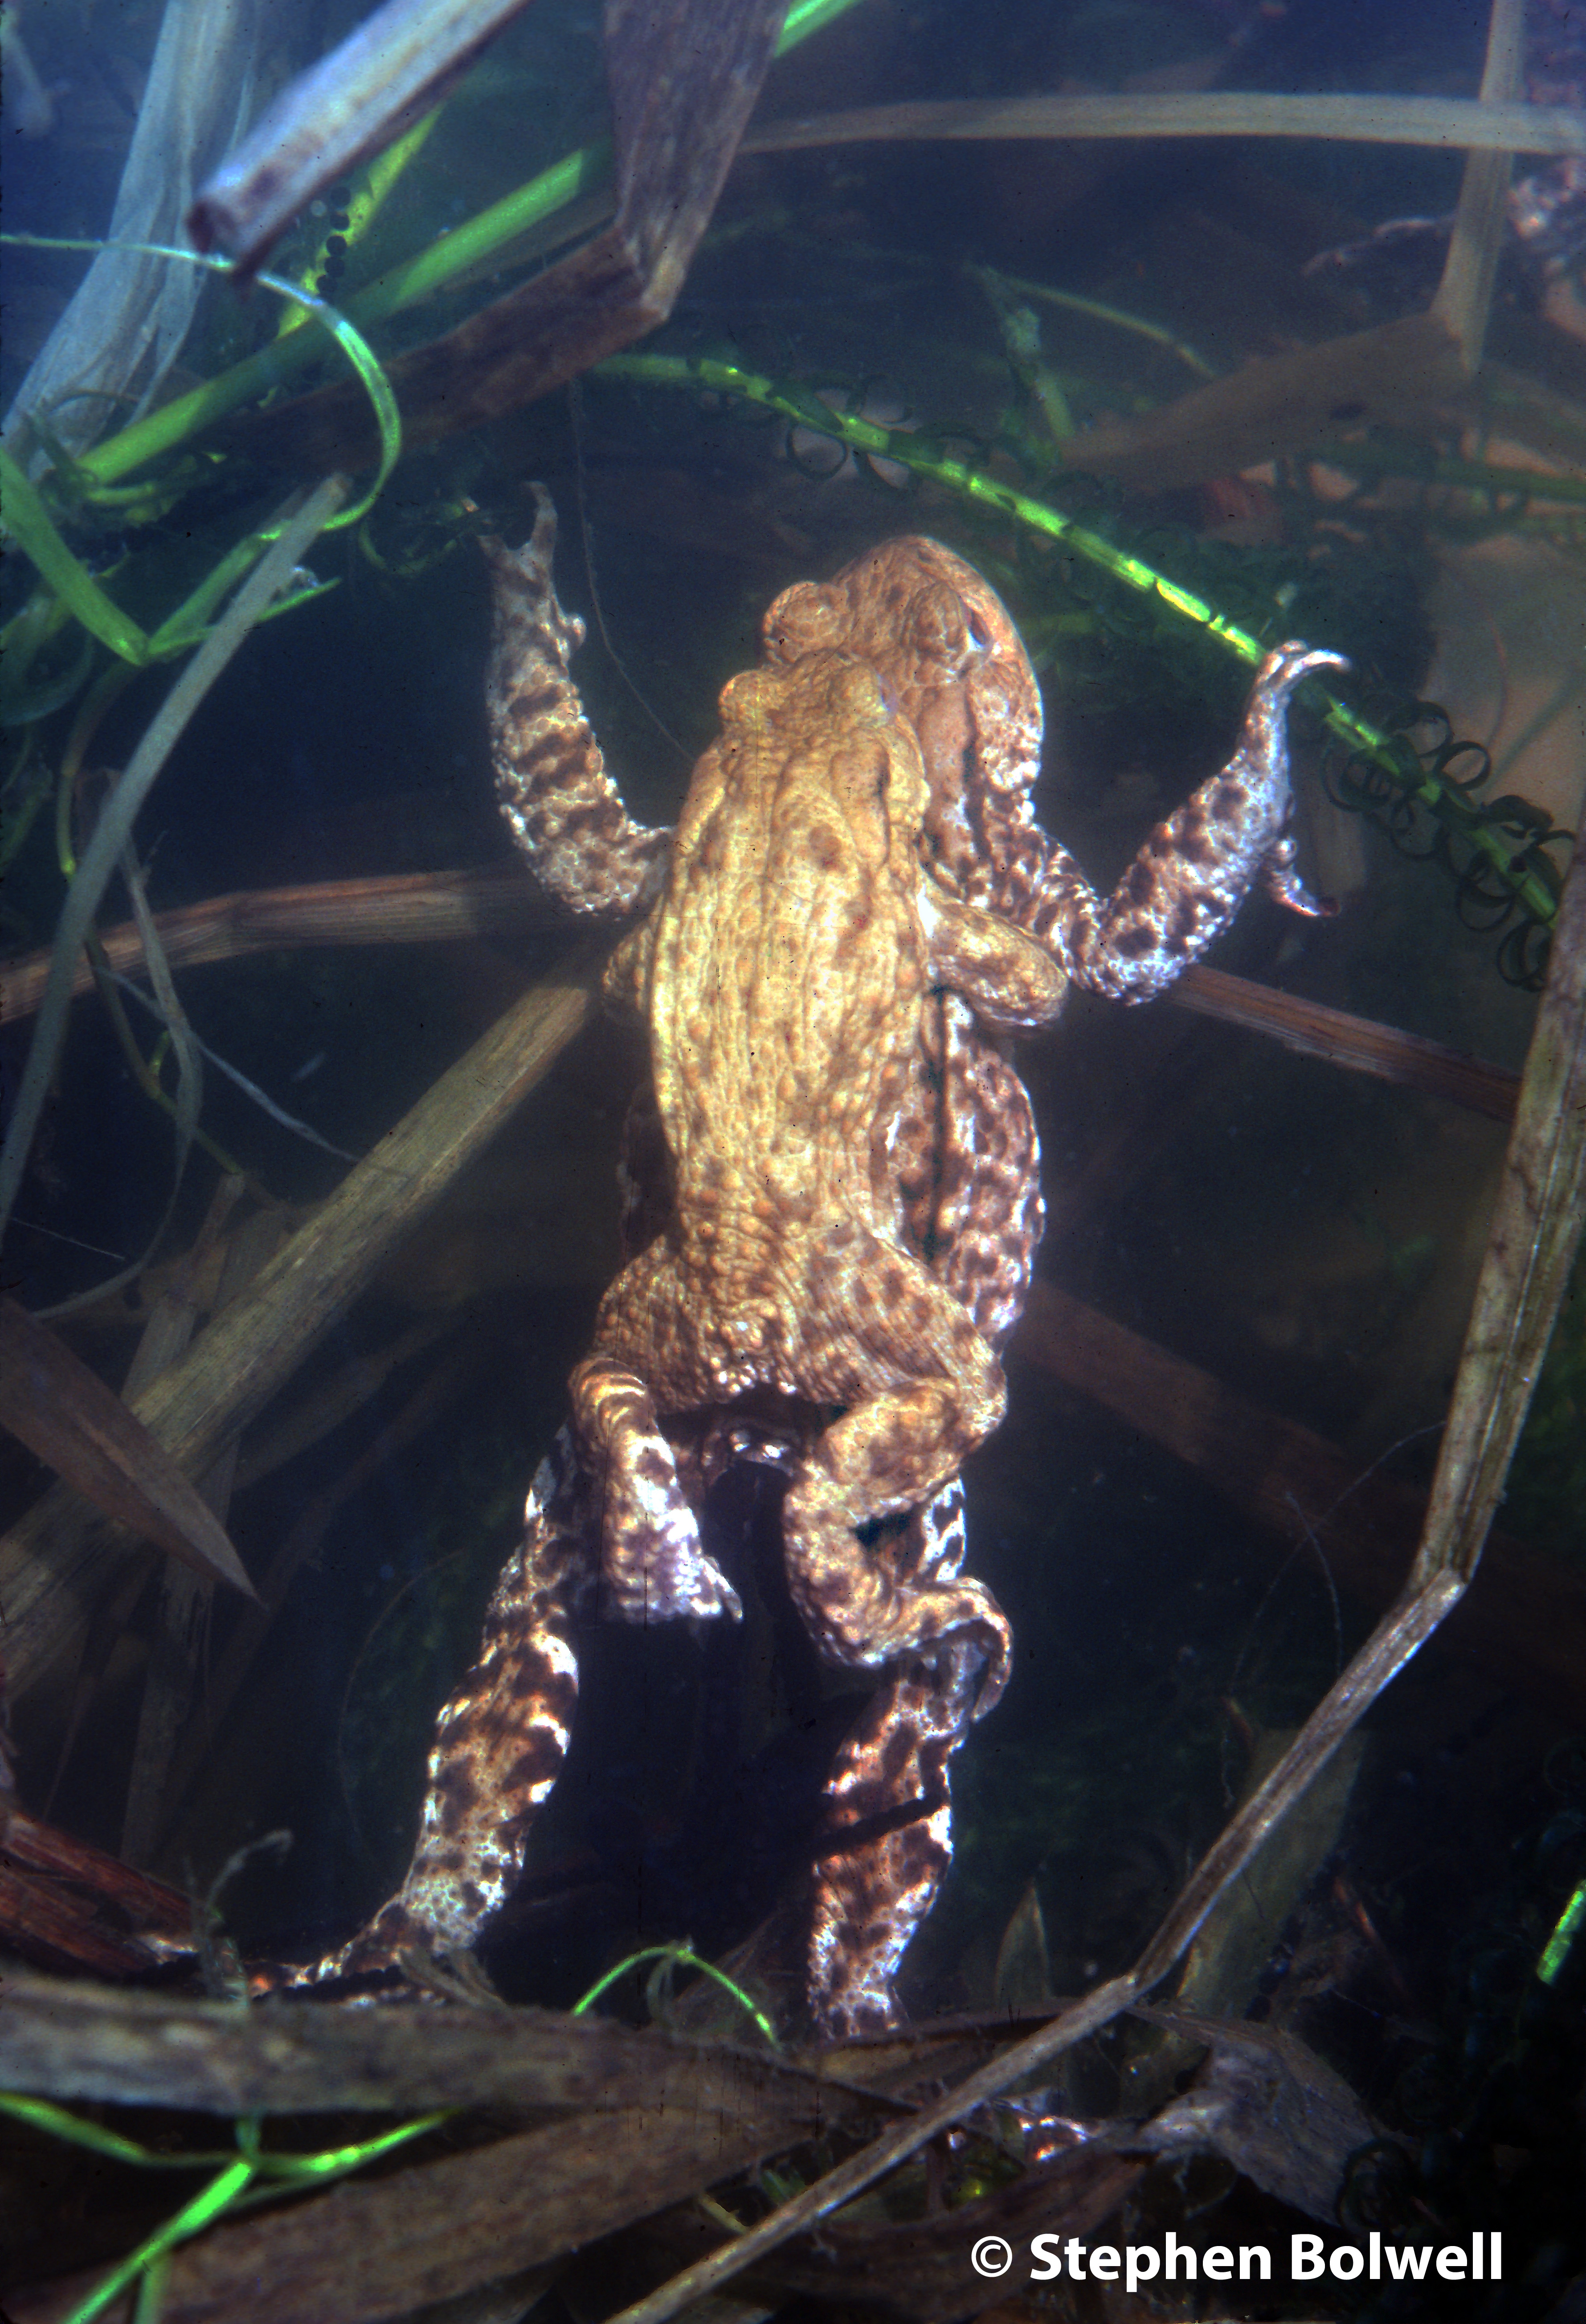 A pair of Common Toads at the point of spawning.